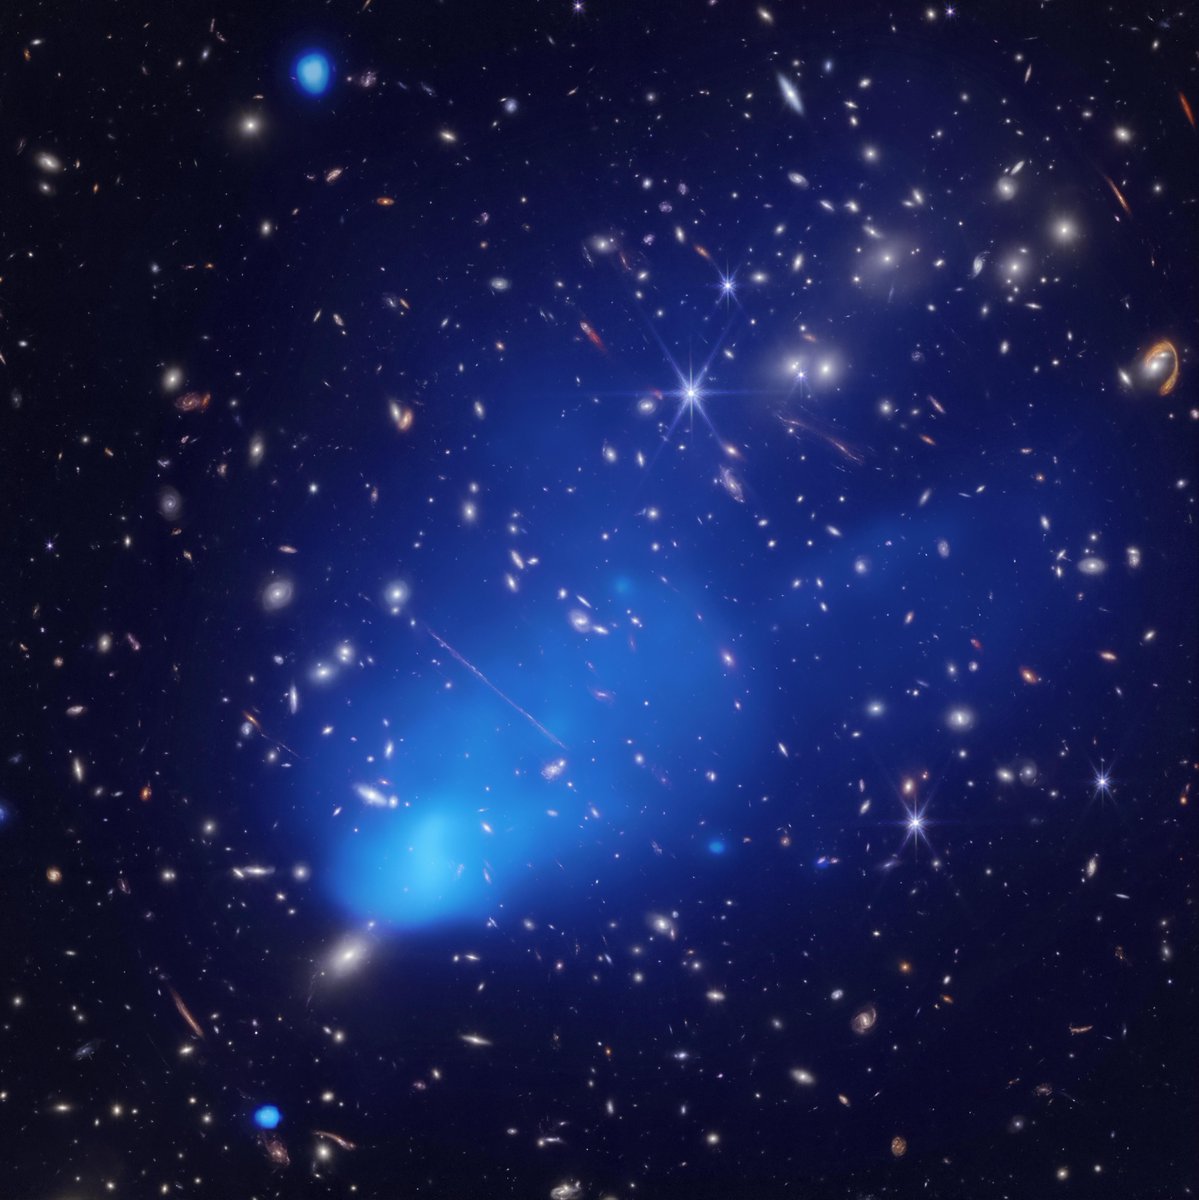 The galaxy cluster 'El Gordo' got its name because of its gigantic mass - 3 million billion times the mass of the Sun. Using data from @chandraxray and @NASAWebb, scientists determined that El Gordo is, in fact, the site of two galaxy clusters that ran into one another.